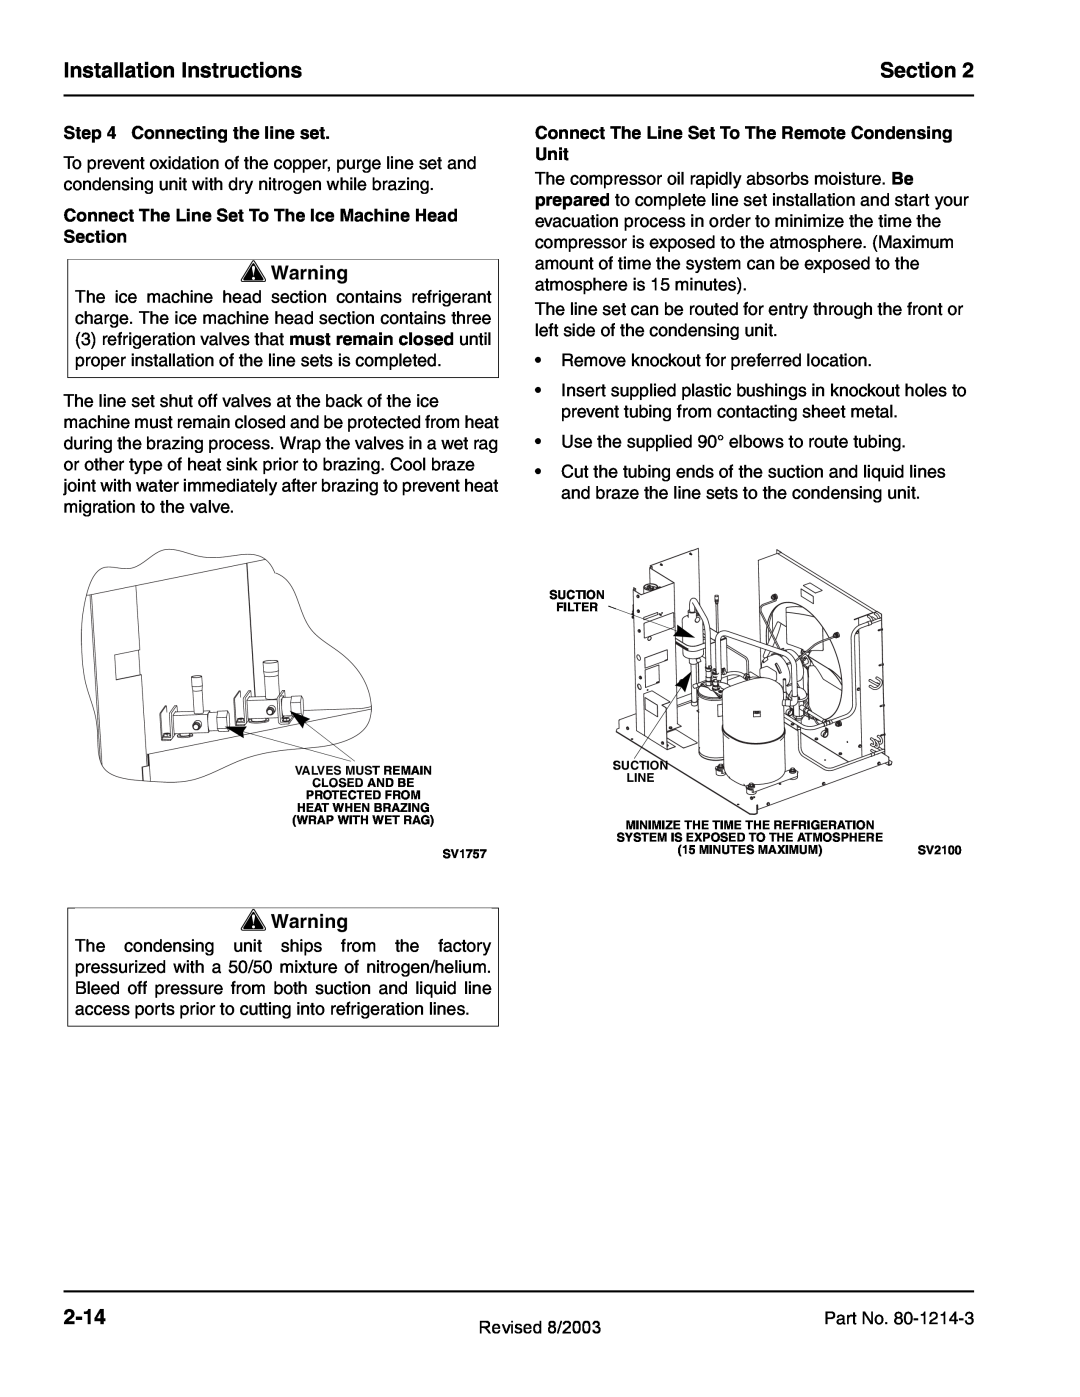 Manitowoc Ice QF0800, QF2300, QC0700, QF0400, QF2200 Installation Instructions, Section, 2-14, Connecting the line set 